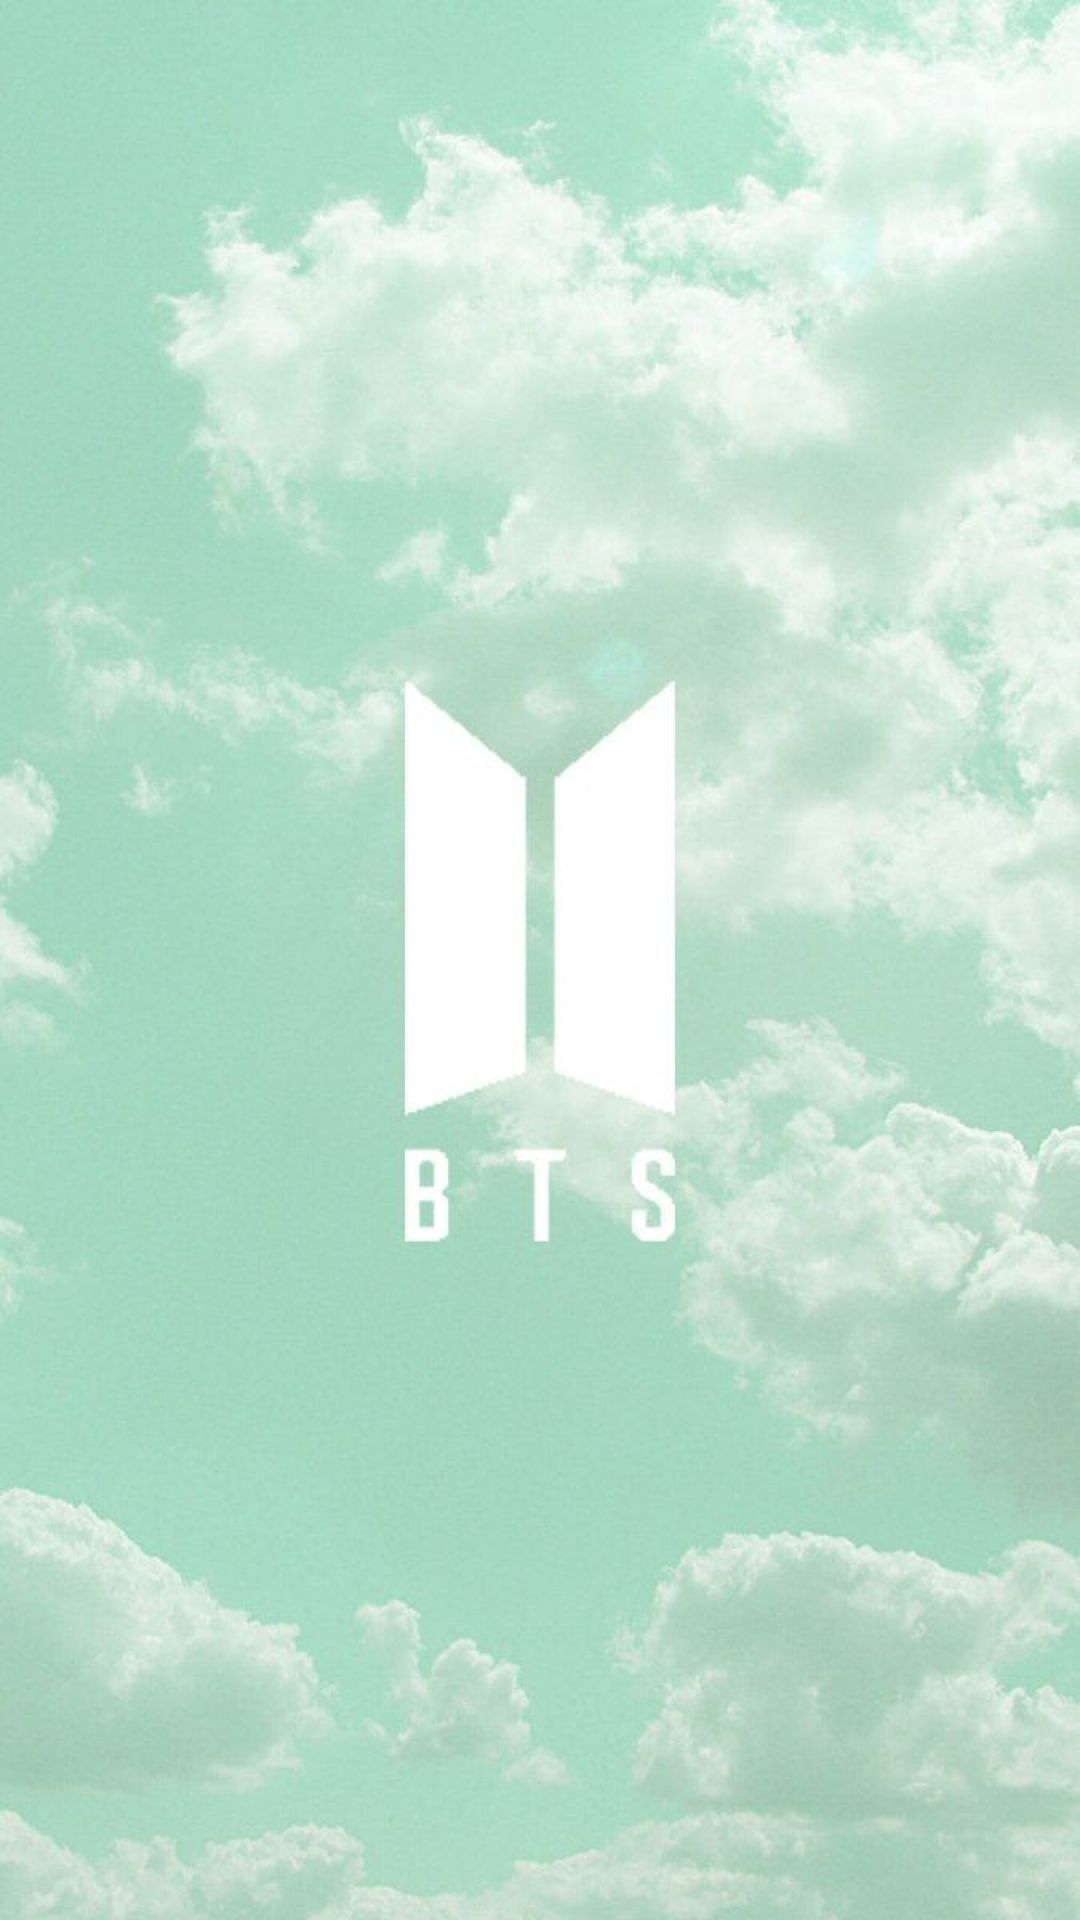 A cloudy sky with the bts logo in it - Neon green, soft green, light green, BTS, pastel green